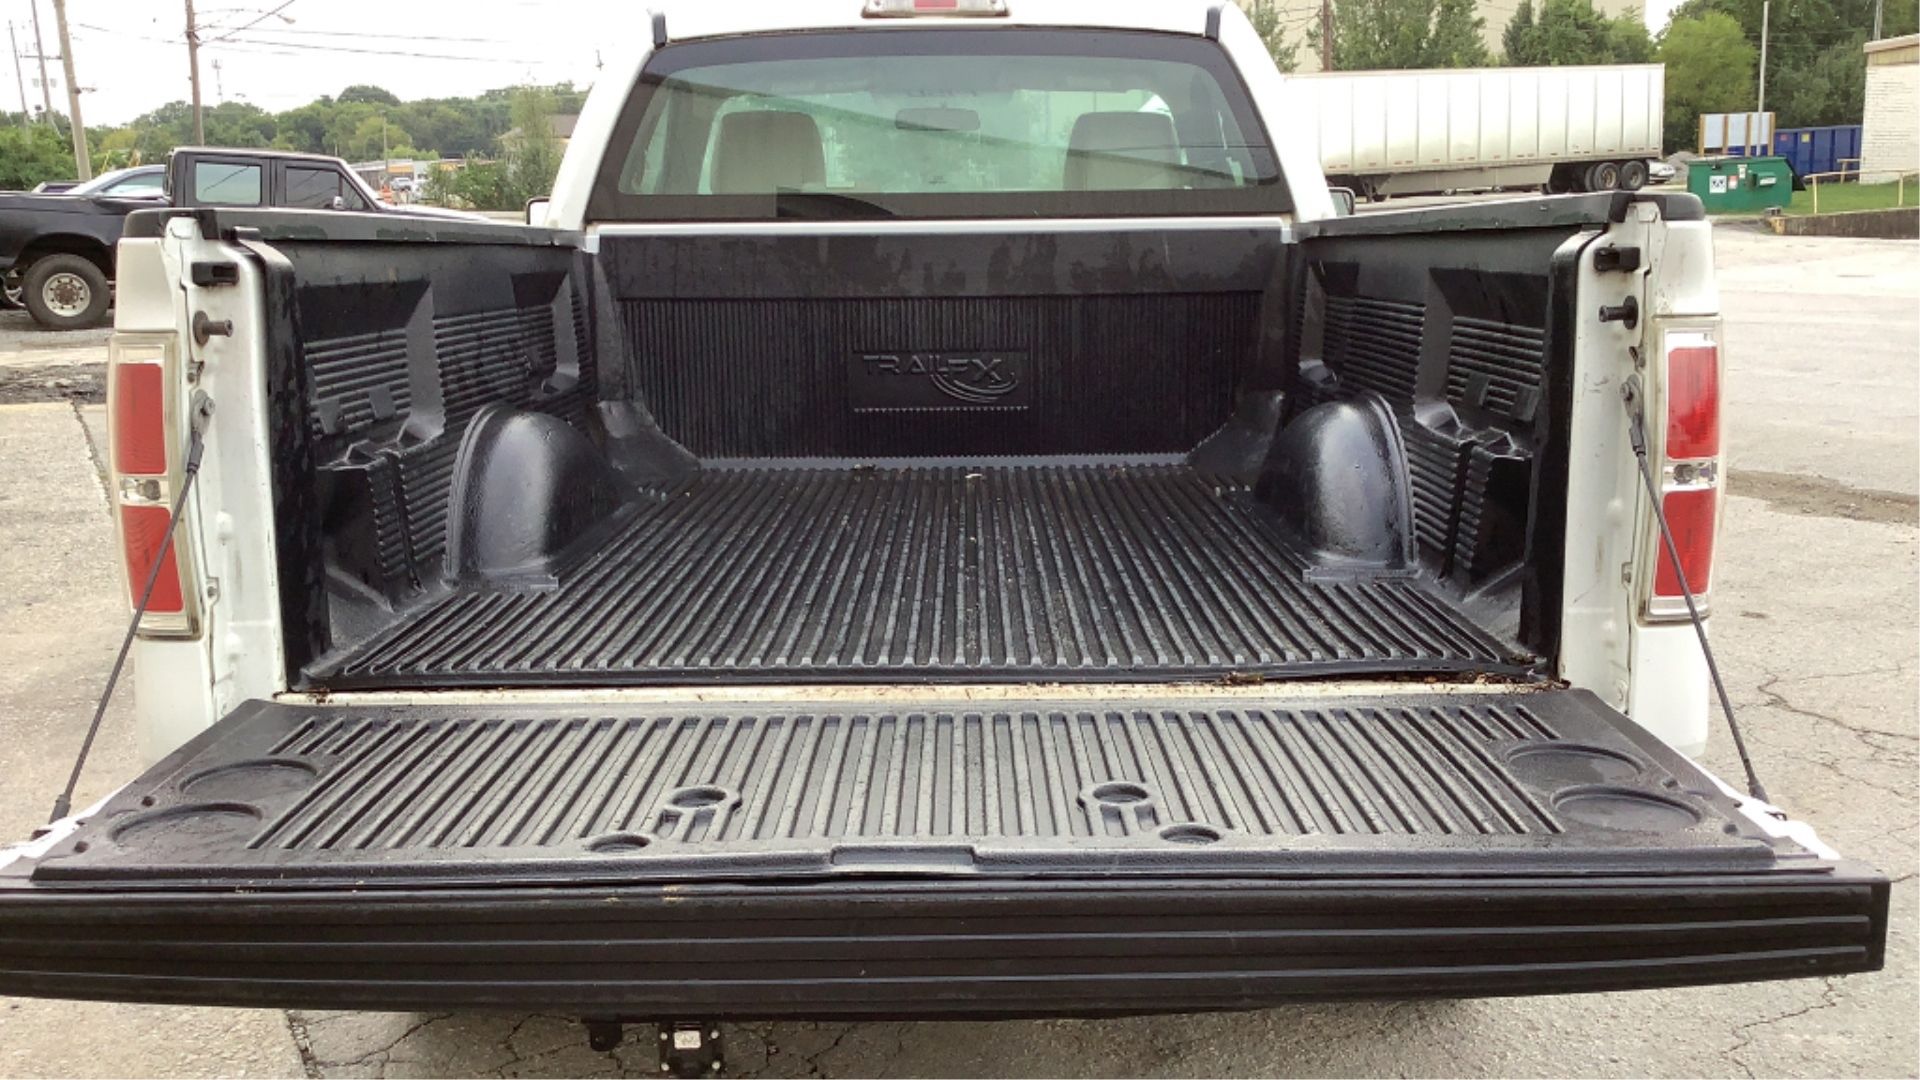 2009 Ford F-150 Regular Cab XL 2WD - Image 56 of 71